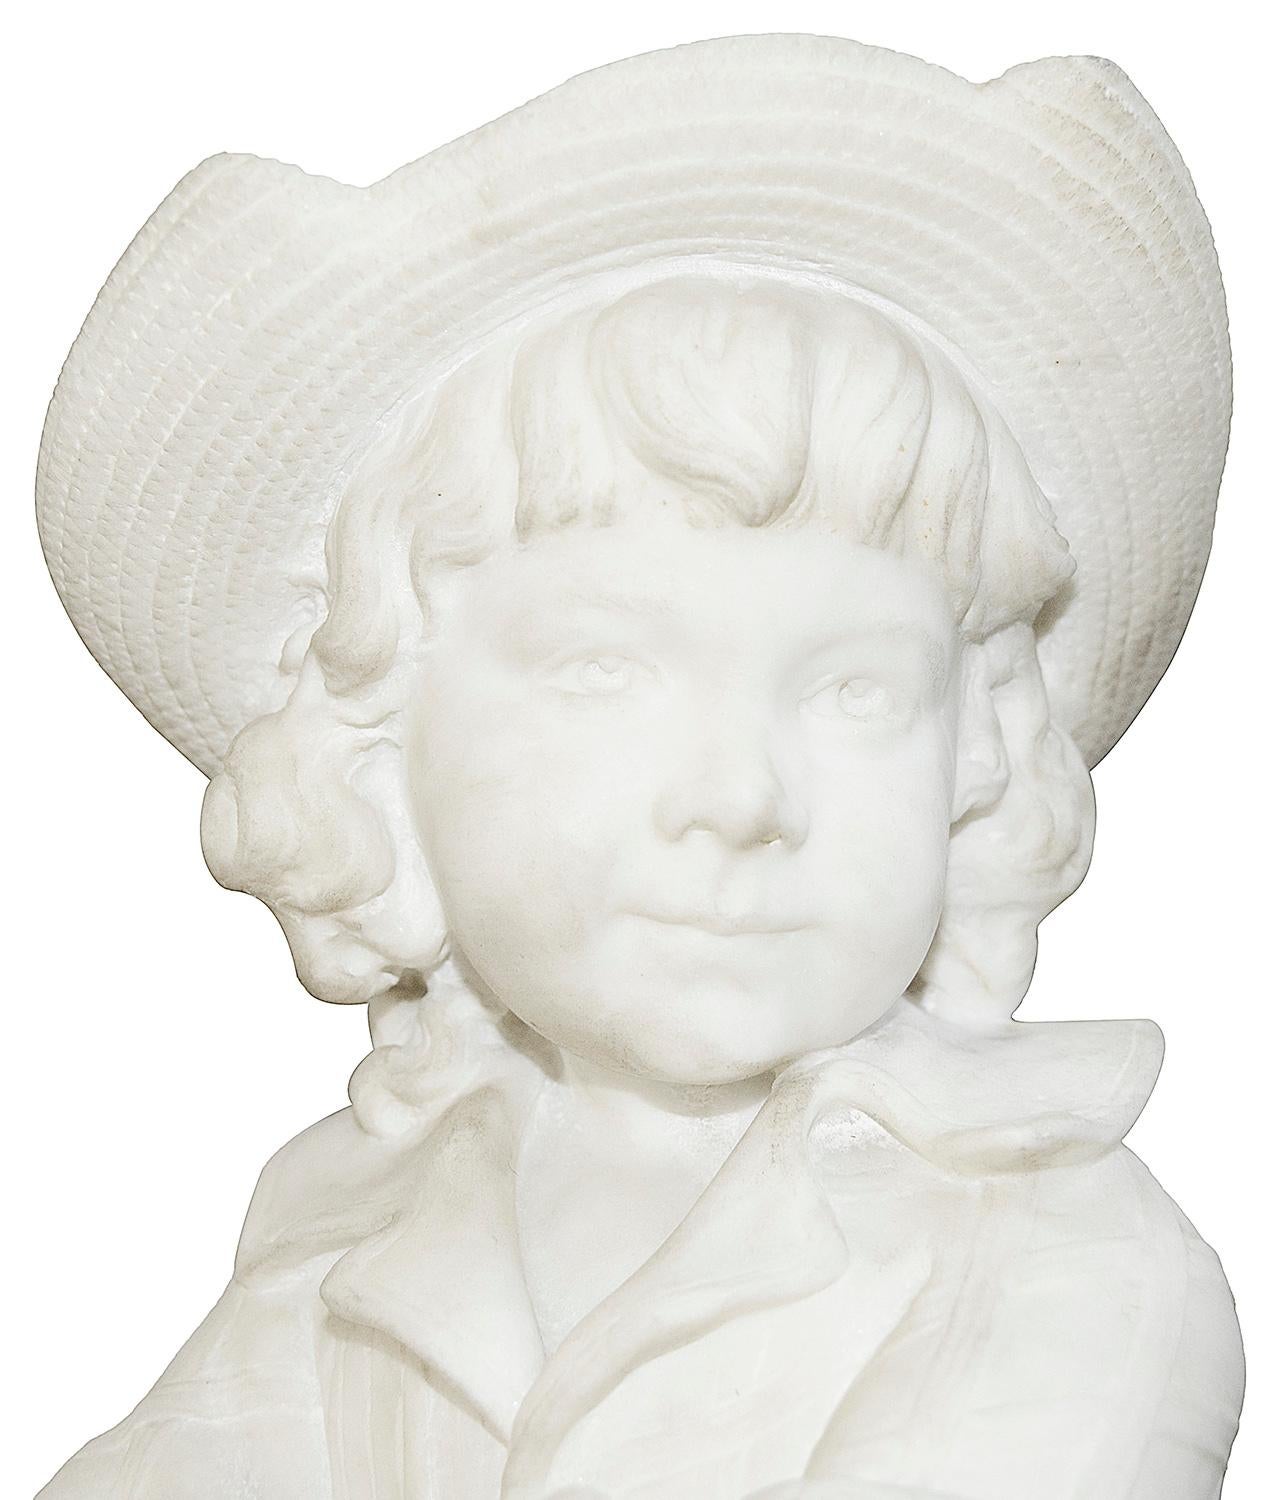 A very good quality 19th century Italian Carrara marble statue of an enchanting young boy sitting on a wooden fence. Mounted on a 19th century green marble pedestal.
In the manner of Pietro Barzanti
Statue measures: 77cm (30